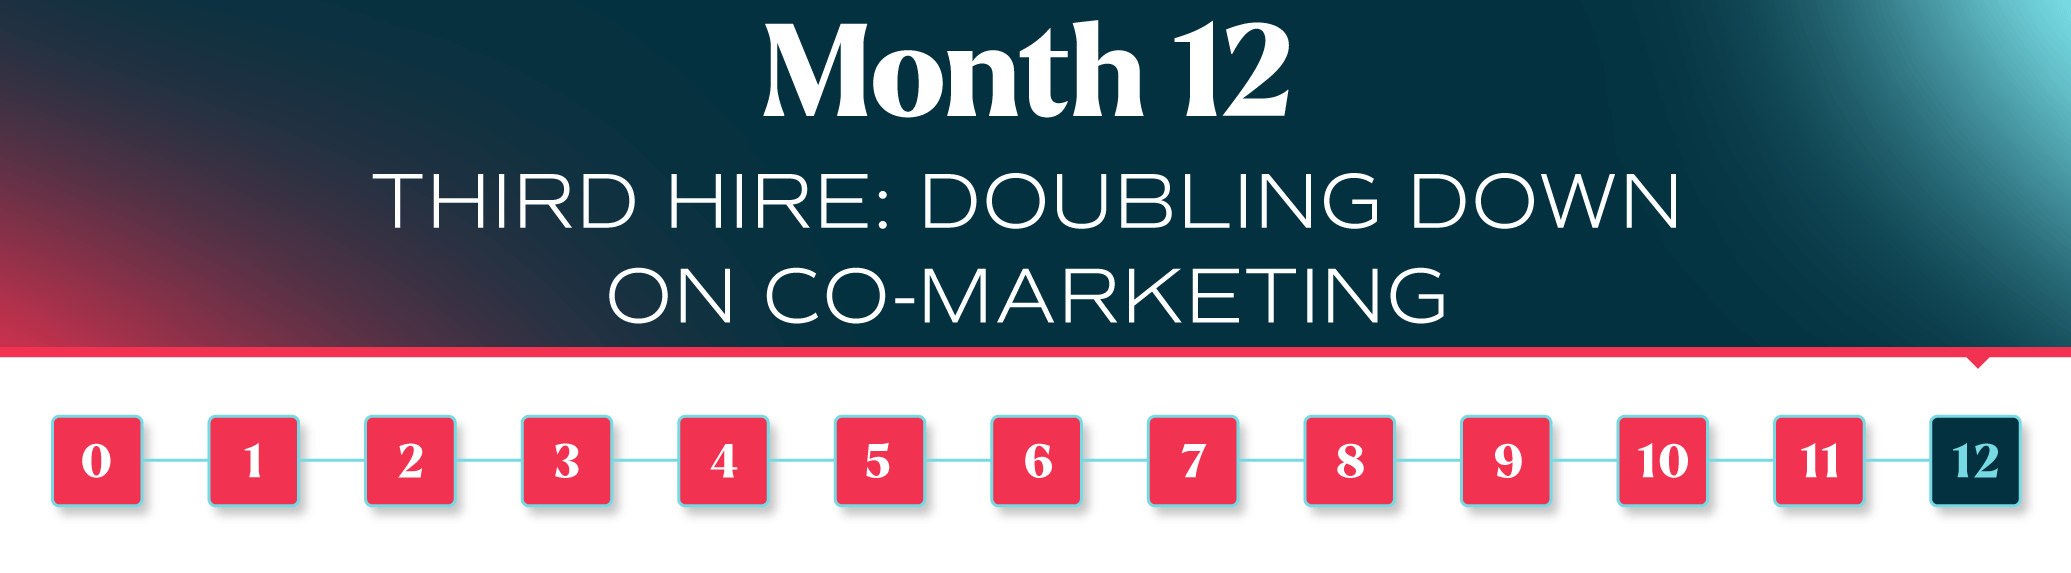 Month 12: Third Hire: Doubling down on co-marketing